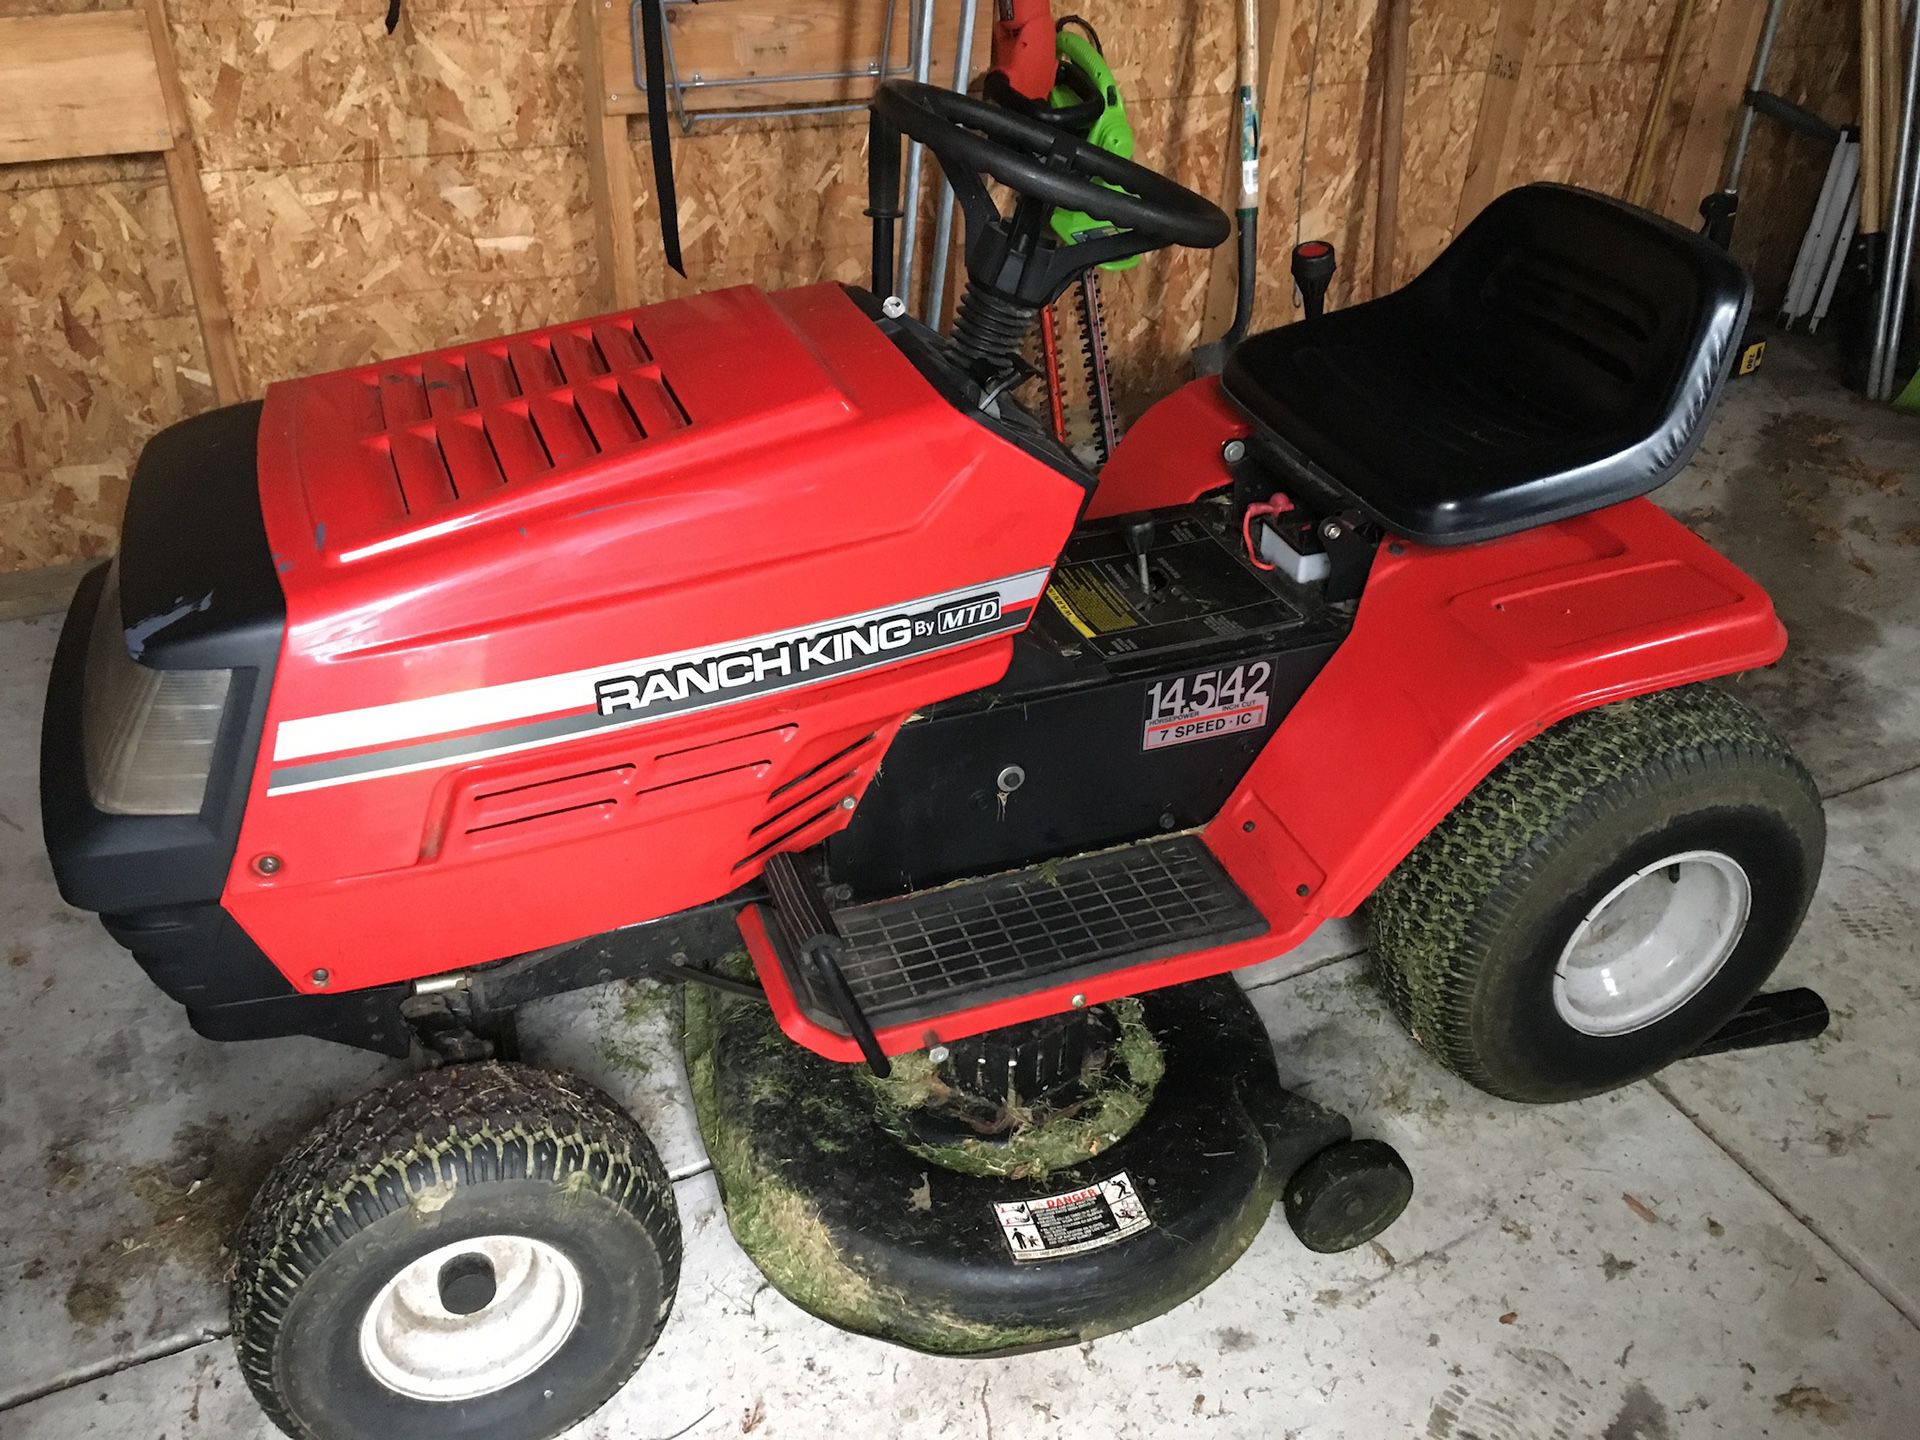 Ranch king tractor lawn cutter